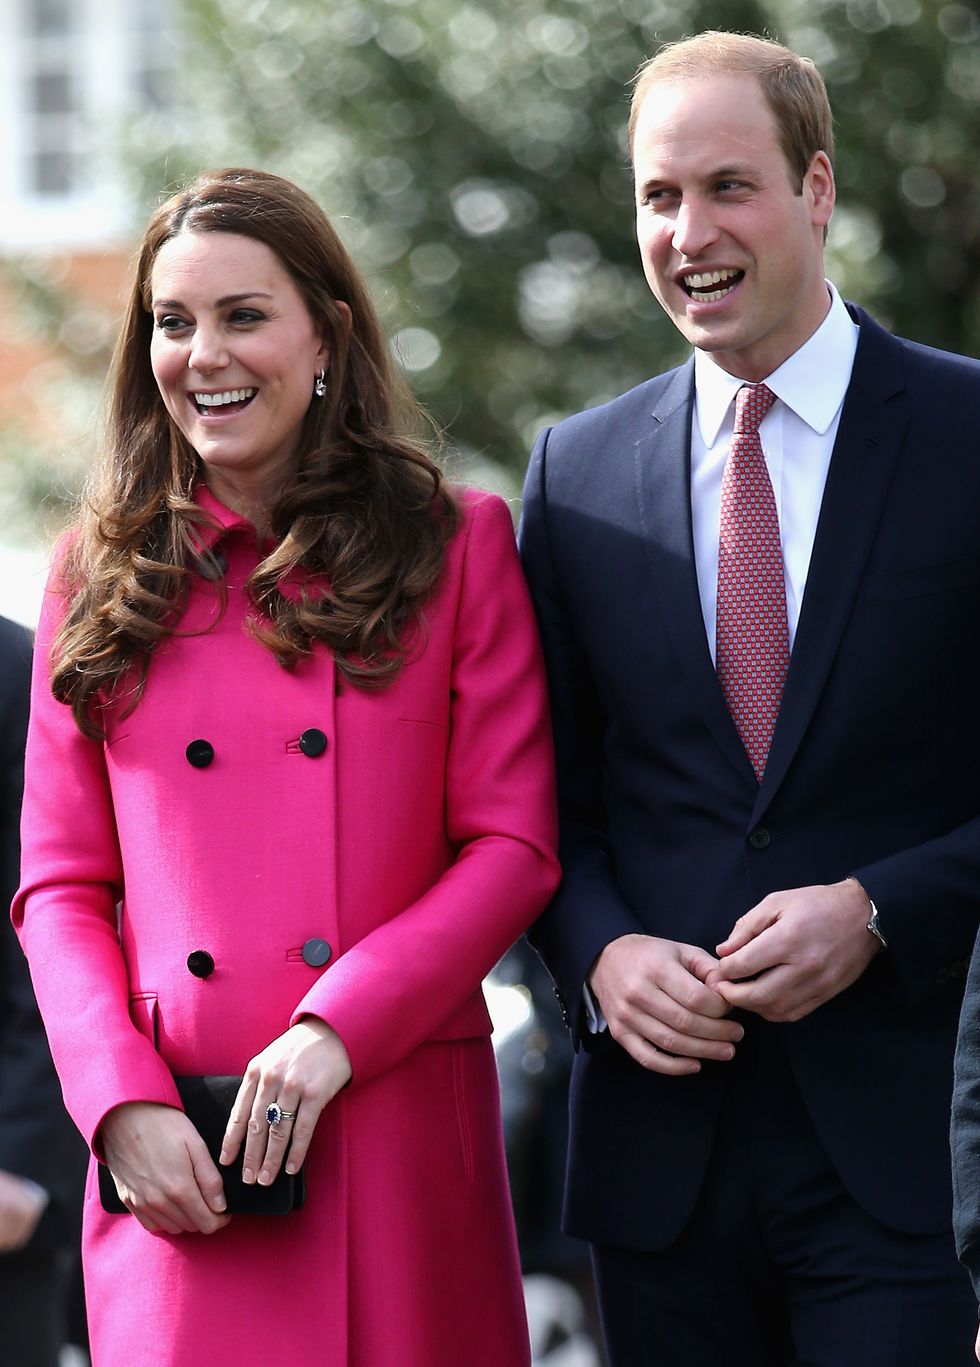 LONDON, ENGLAND - MARCH 27:  Prince William, Duke of Cambridge and Catherine, Duchess of Cambridge arrive at the XLP Mobile recording Studio on March 27, 2015 in London, England.  (Photo by Chris Jackson - WPA Pool/Getty Images)